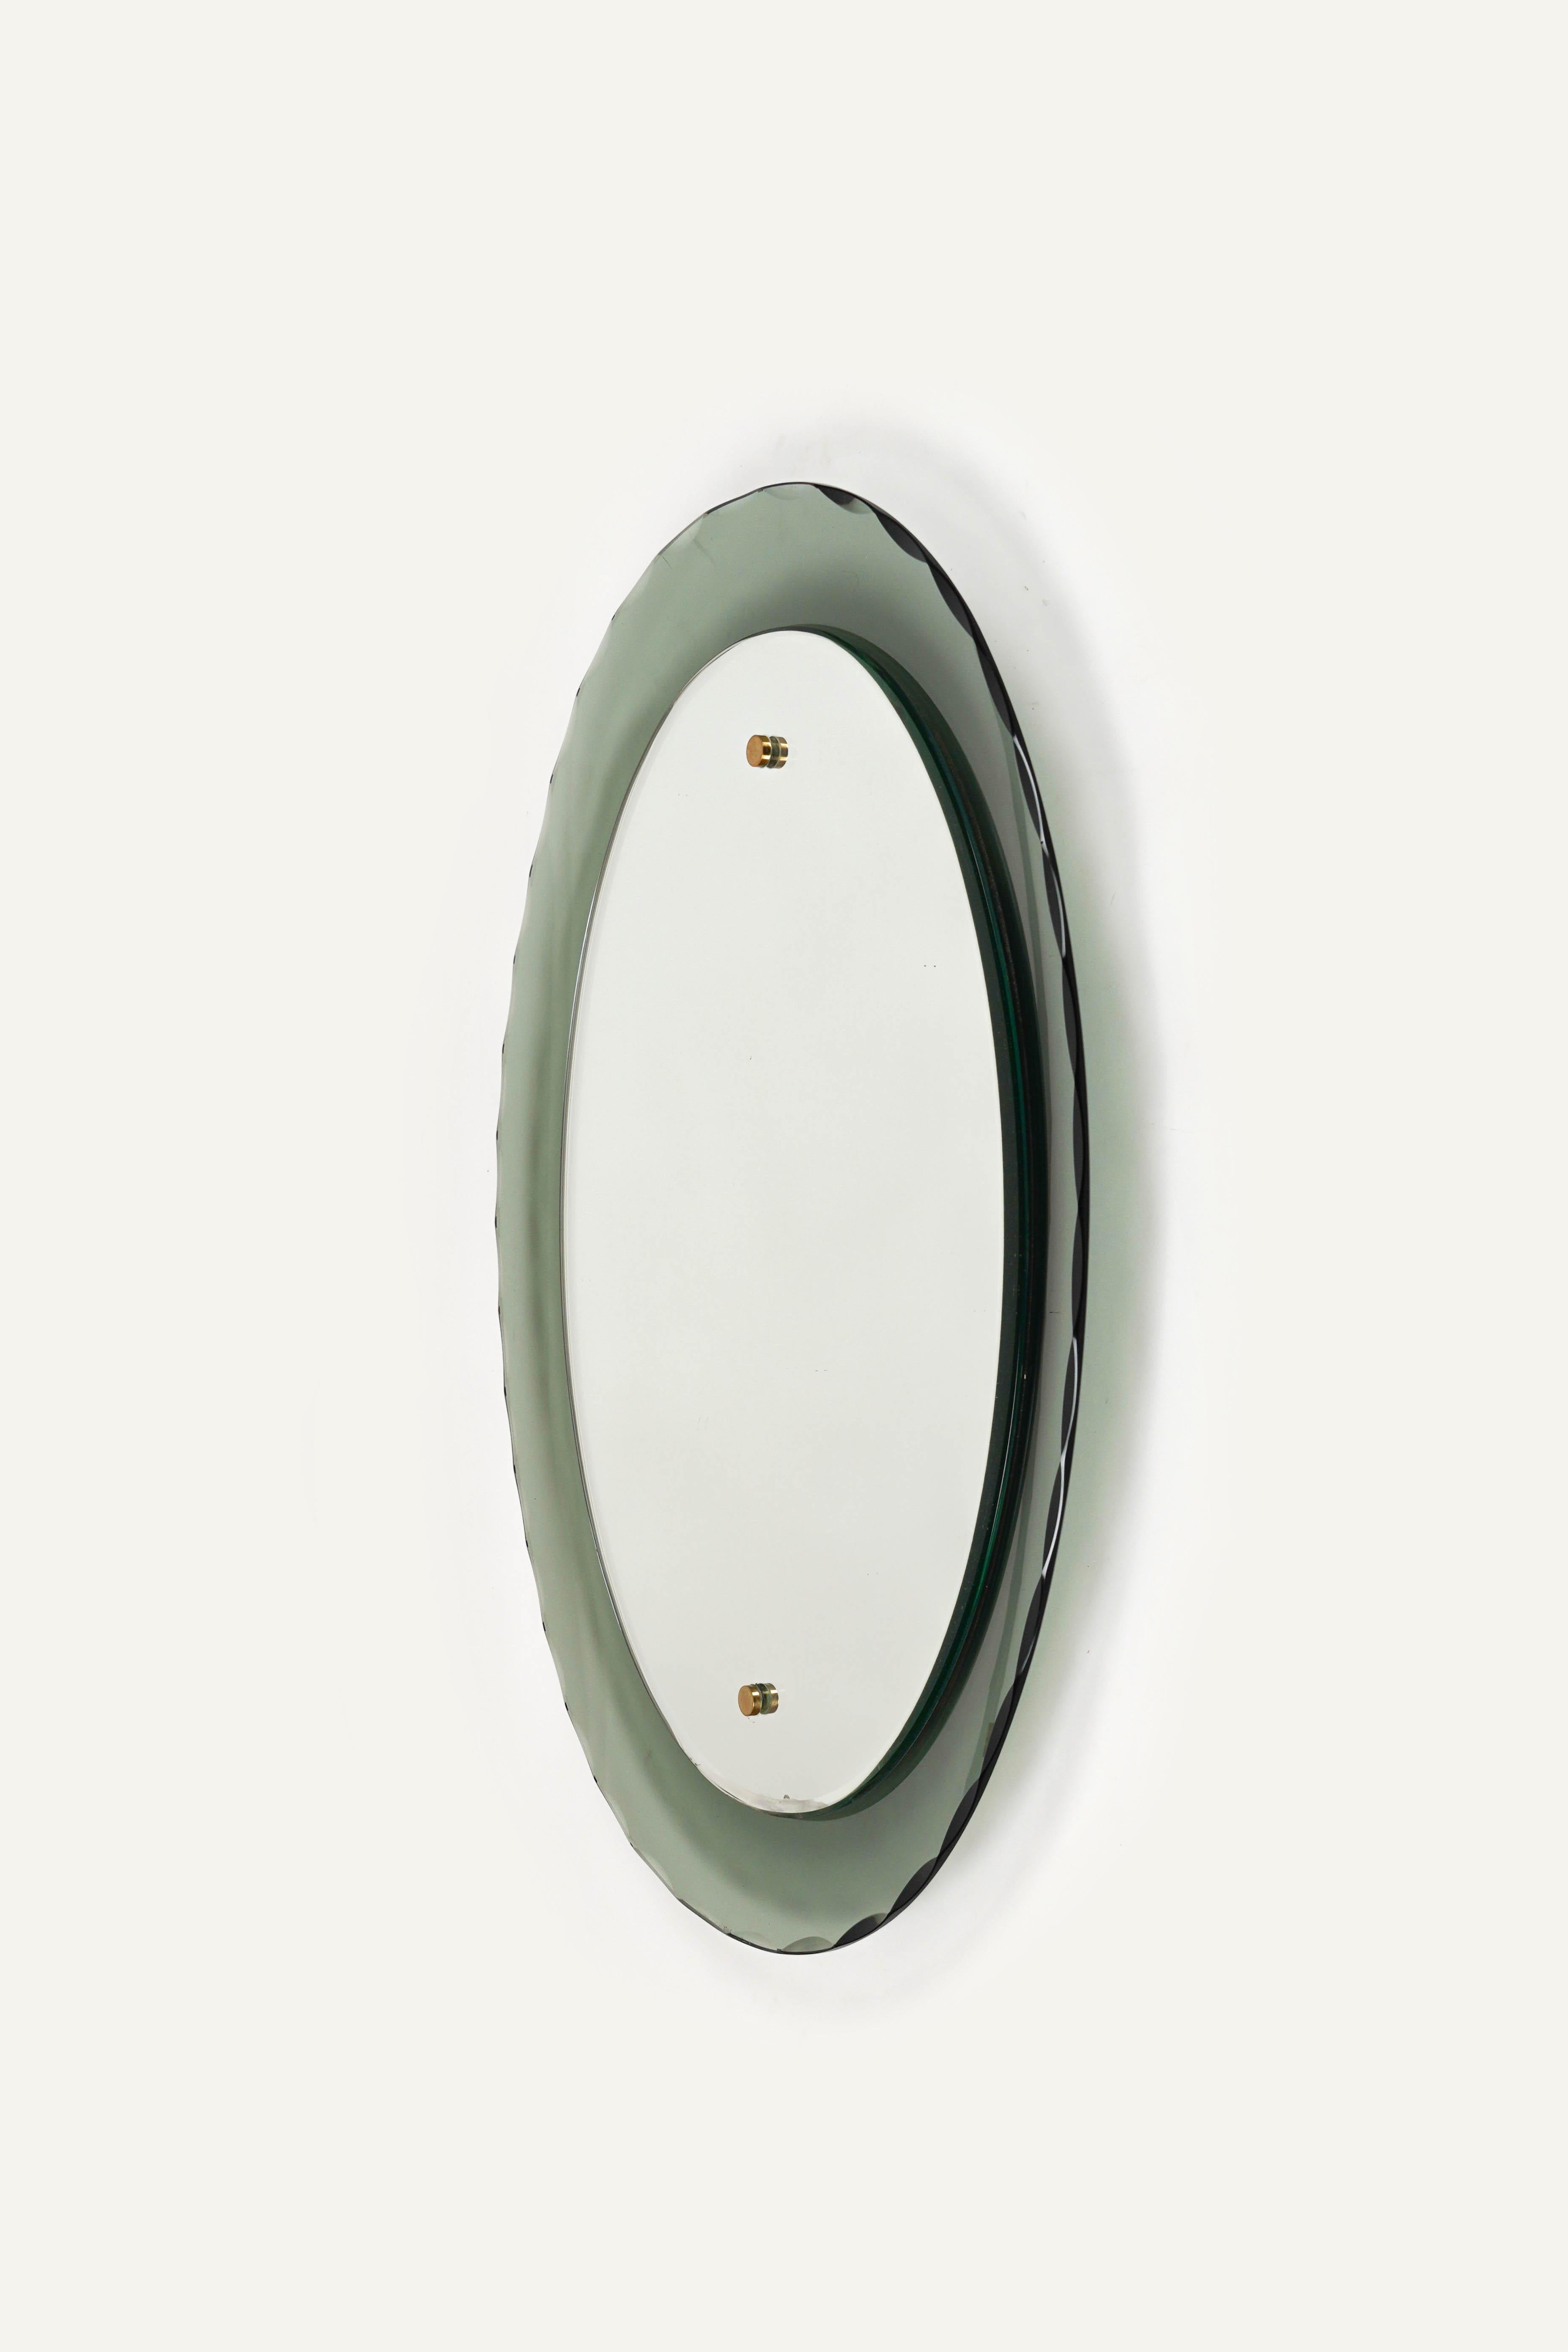 Midcentury Oval Wall Mirror whit Smoked Glass Frame by Cristal Arte, Italy 1960s For Sale 3